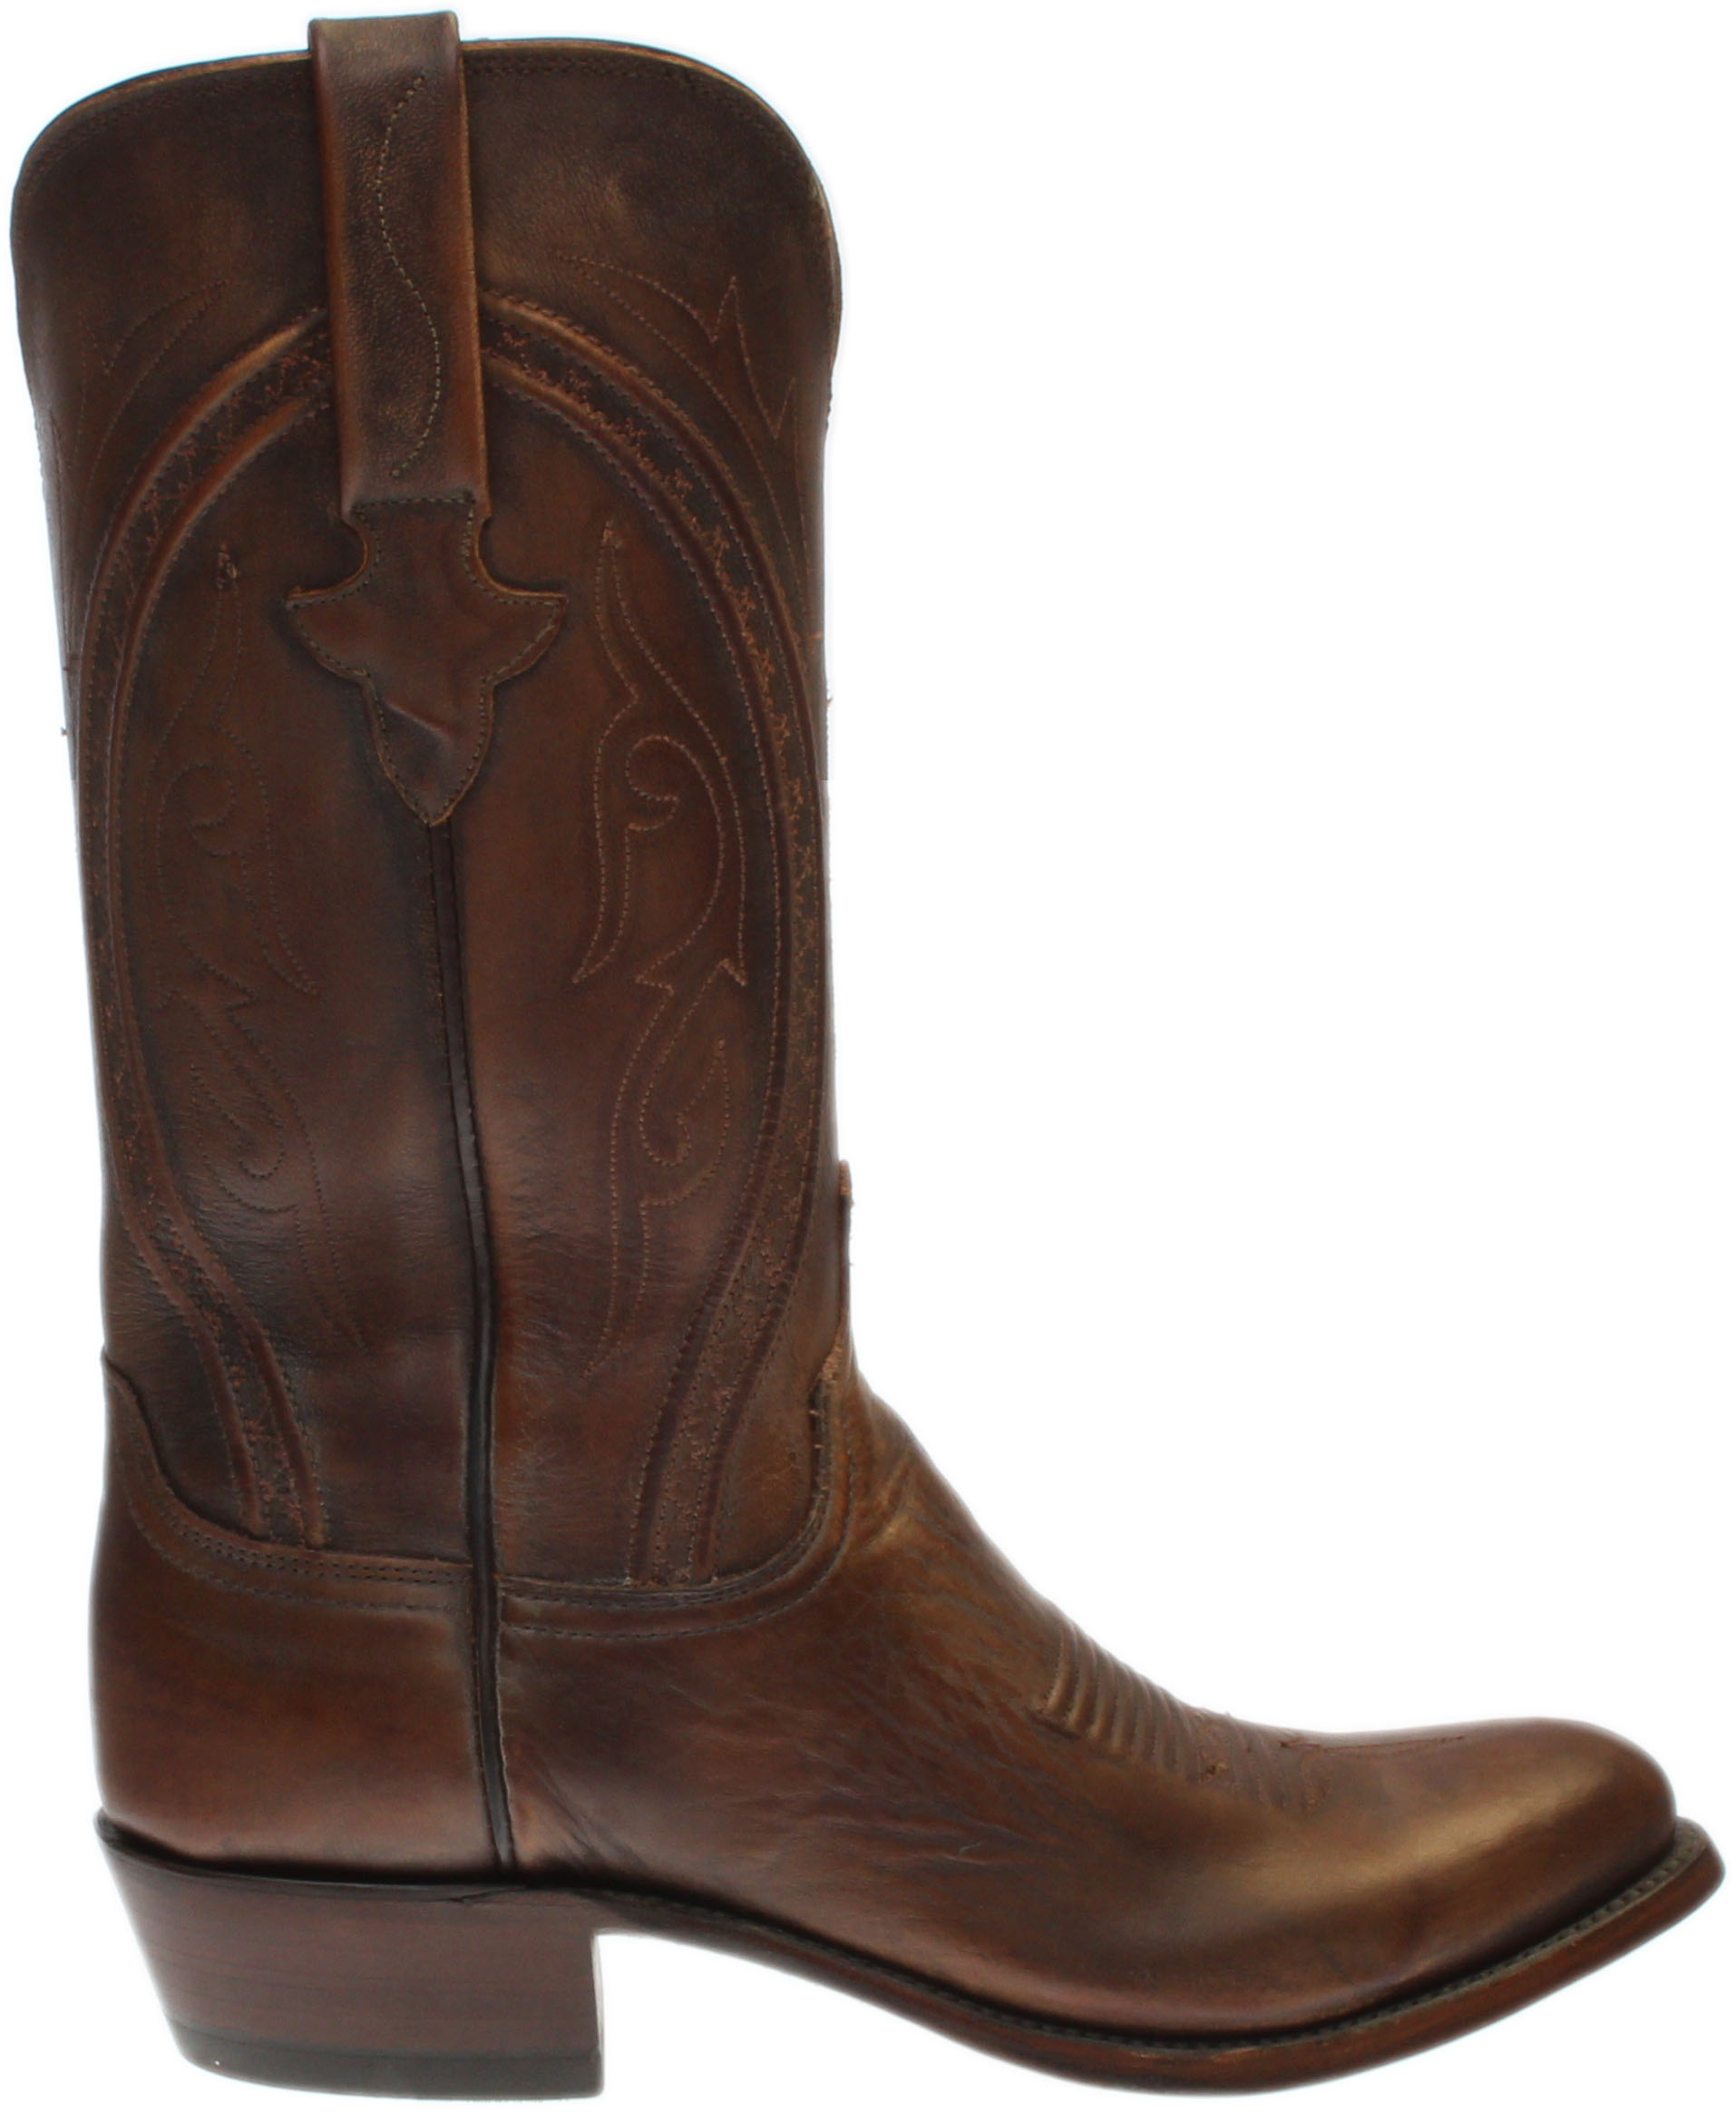 Lucchese Clint Mad Dog Goat Leather Boots